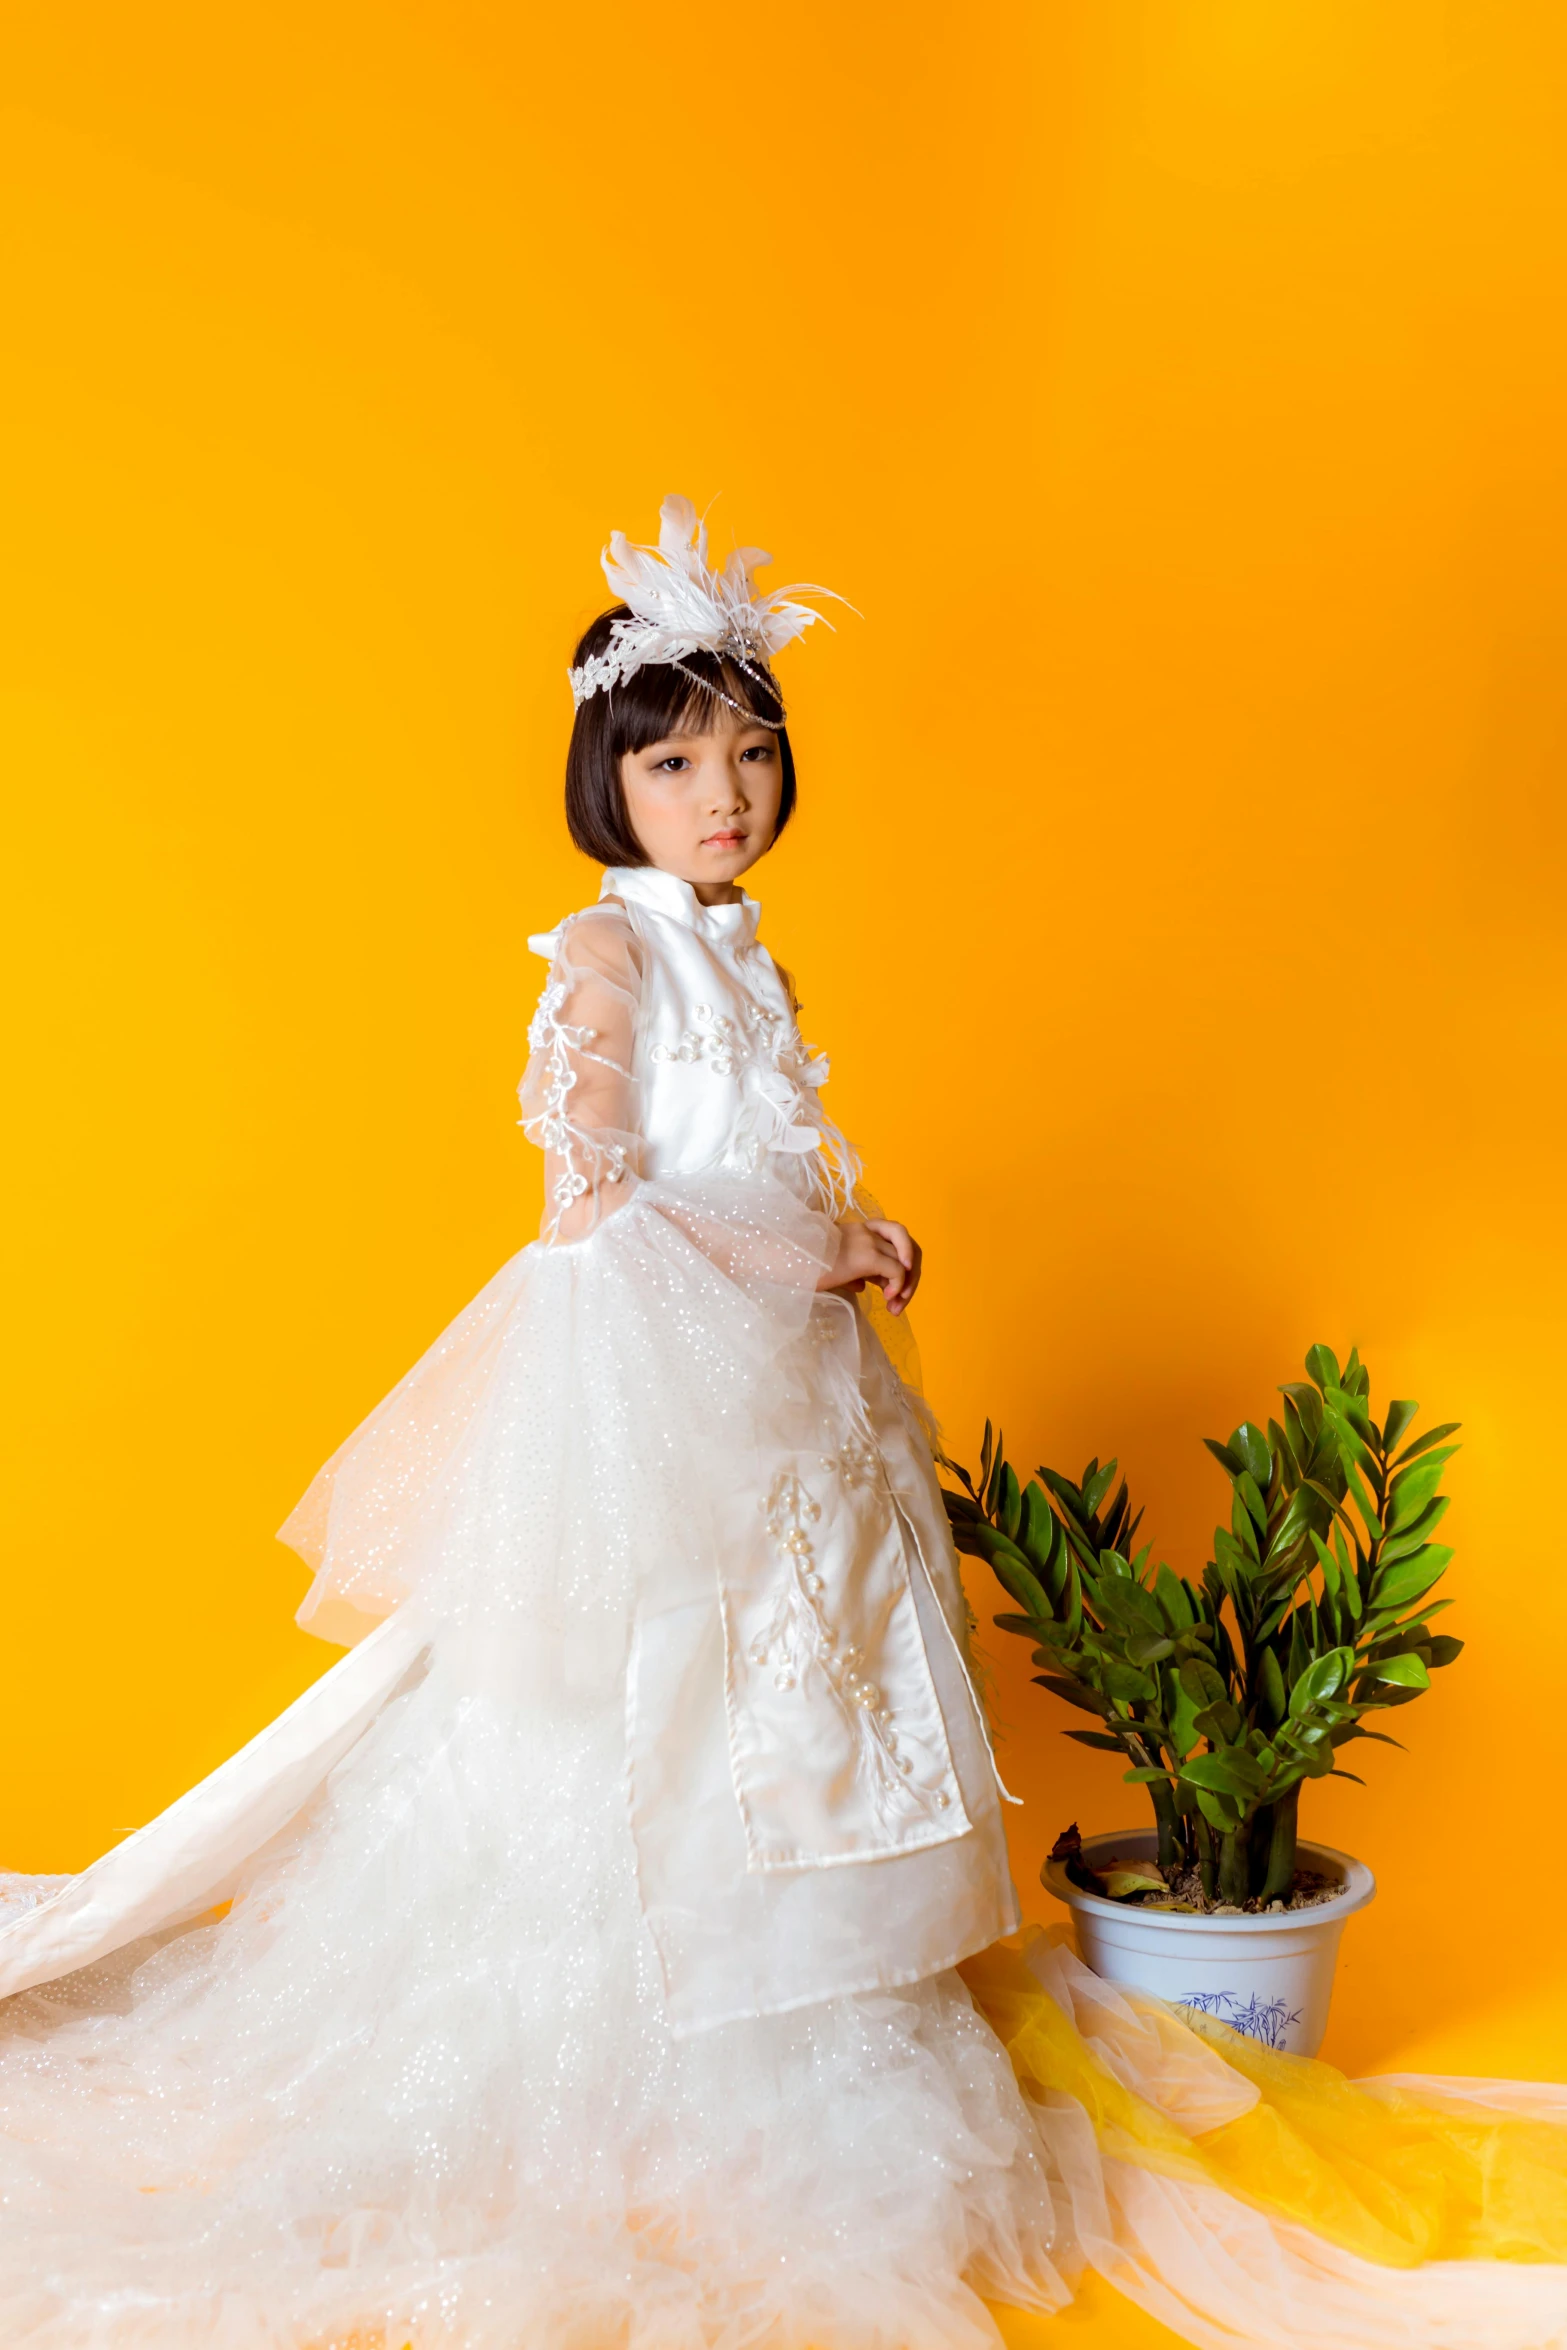 a little girl in a wedding dress standing next to a potted plant, an album cover, inspired by Tang Di, shutterstock contest winner, baroque, haute couture fashion shoot, 15081959 21121991 01012000 4k, wings lace wear, in style of lam manh